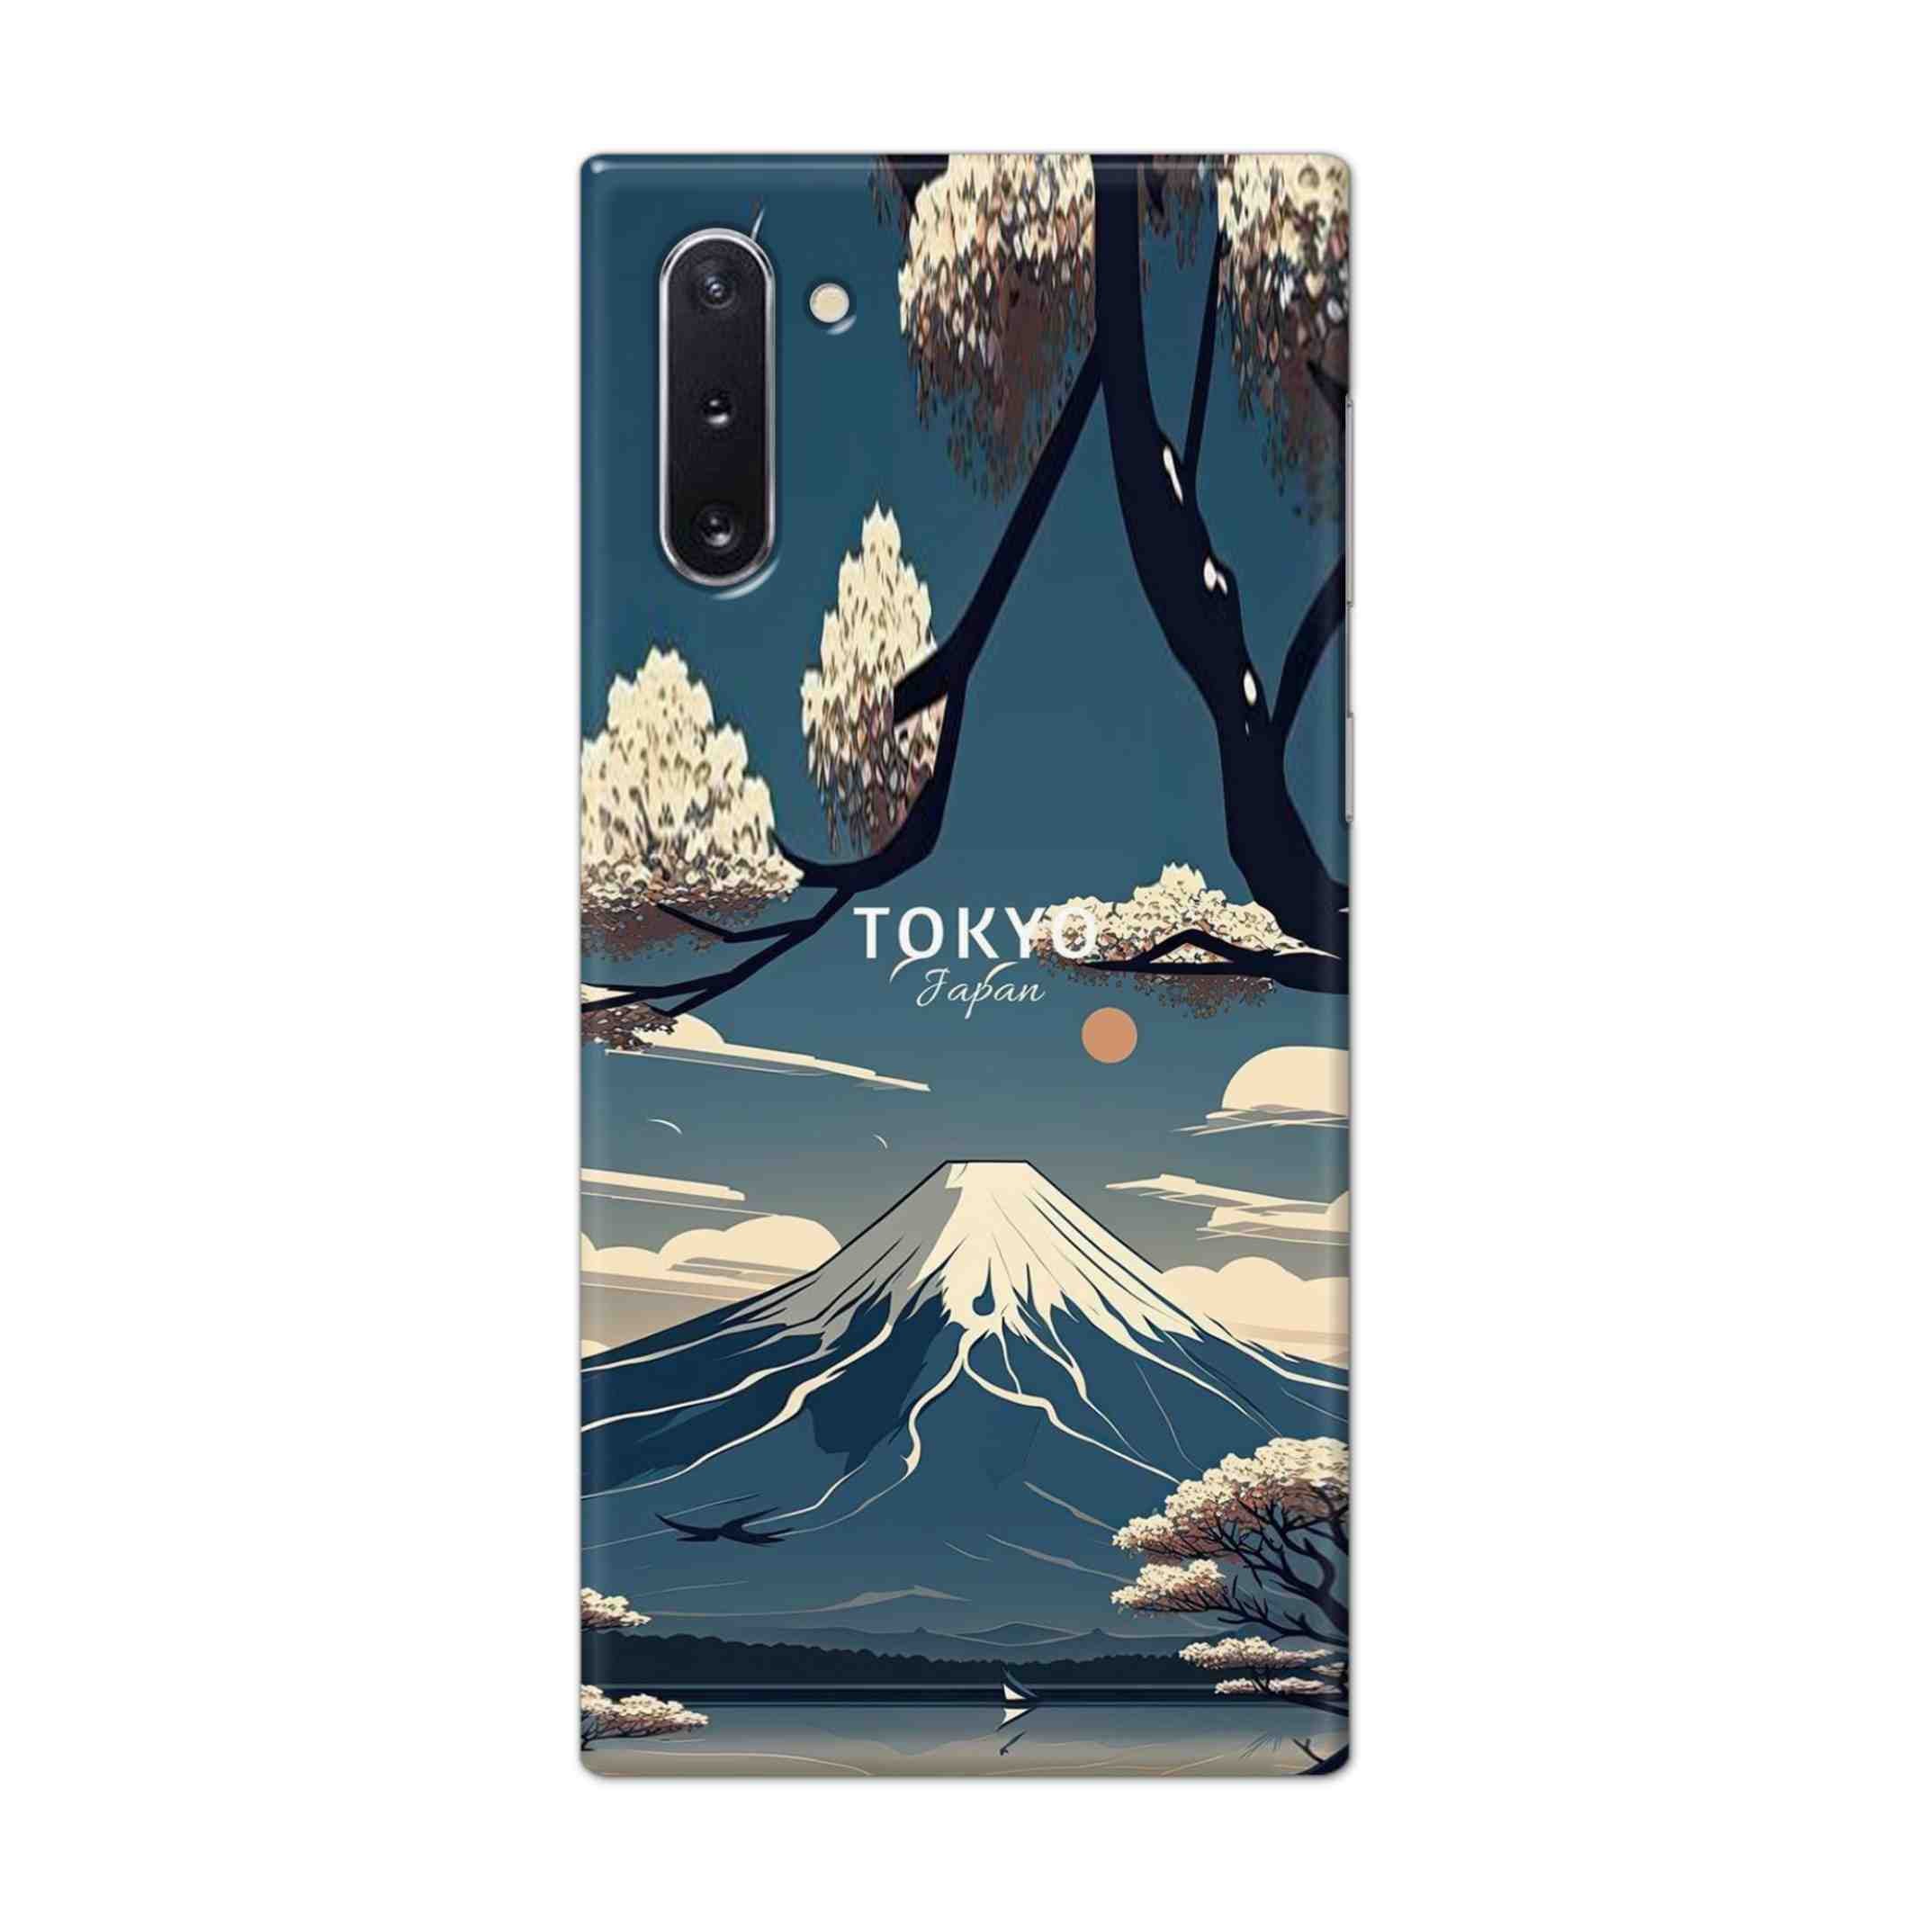 Buy Tokyo Hard Back Mobile Phone Case Cover For Samsung Galaxy Note 10 Online